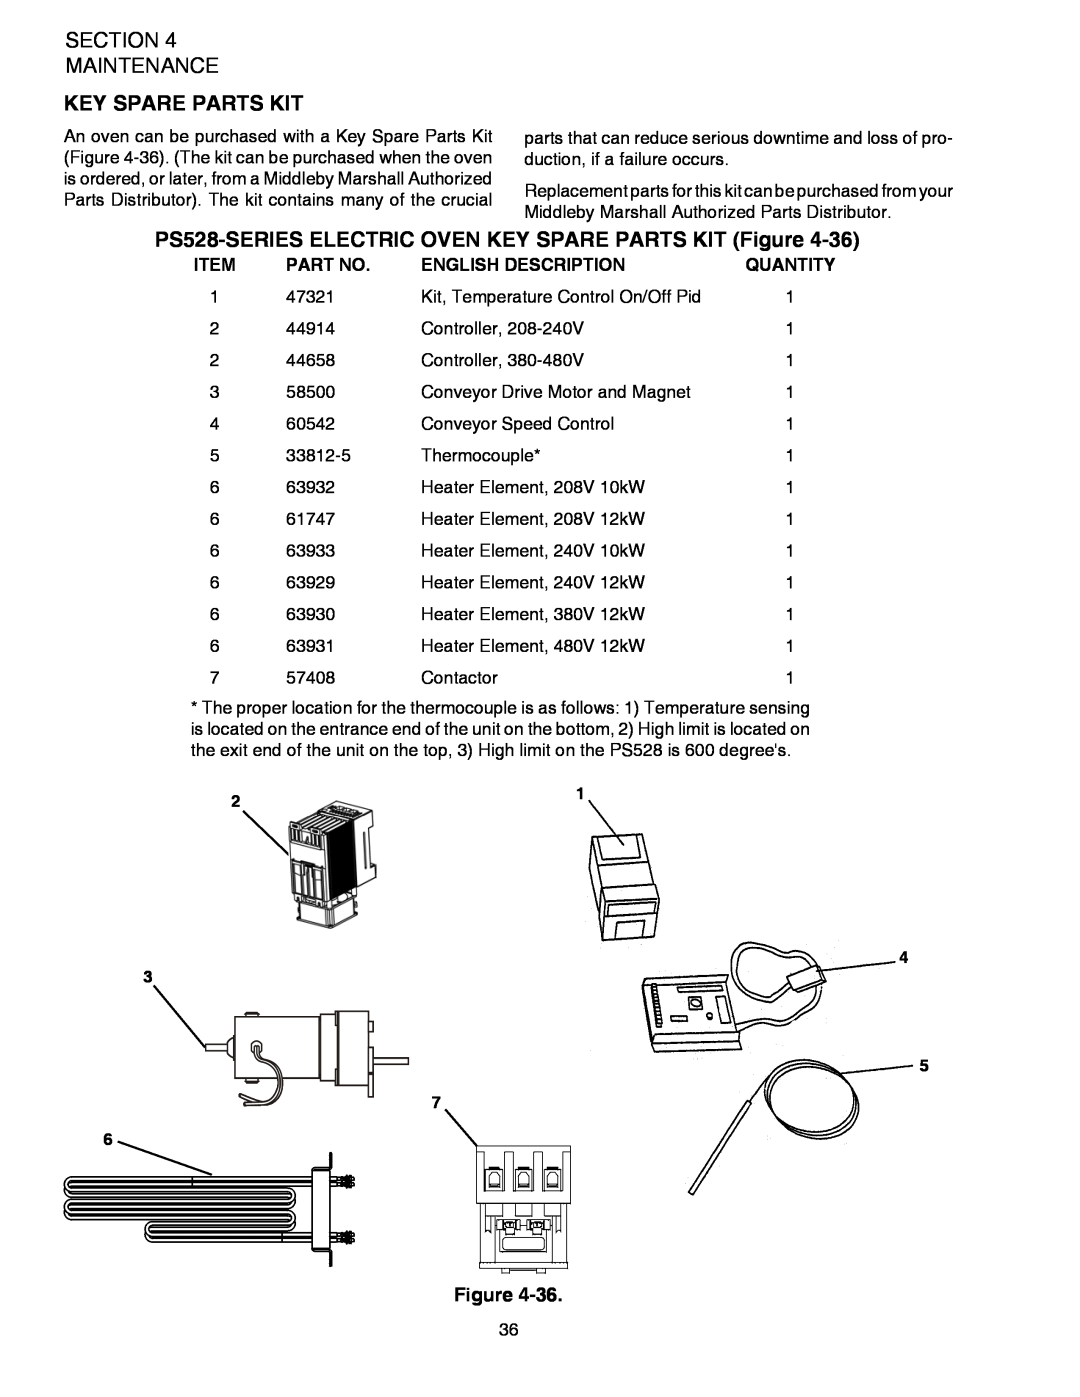 Middleby Marshall PS528 (Double) Key Spare Parts Kit, PS528-SERIES ELECTRIC OVEN KEY SPARE PARTS KIT Figure, Quantity 